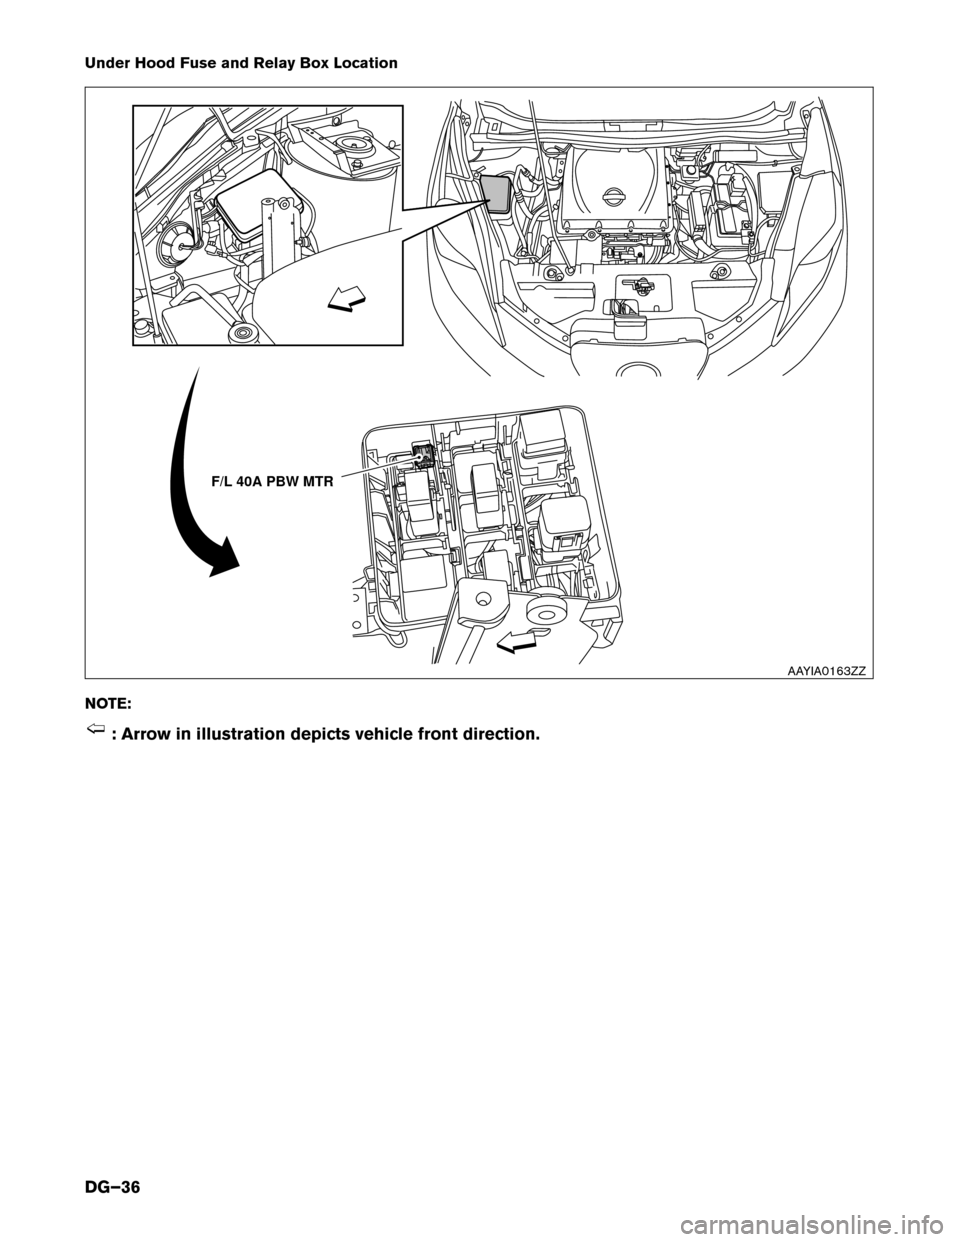 NISSAN LEAF 2017 1.G Dismantling Guide Under Hood Fuse and Relay Box Location
NO
TE: : Arrow in illustration depicts vehicle front direction. F/L 40A PBW MTR
AAYIA0163ZZ
DG–36 